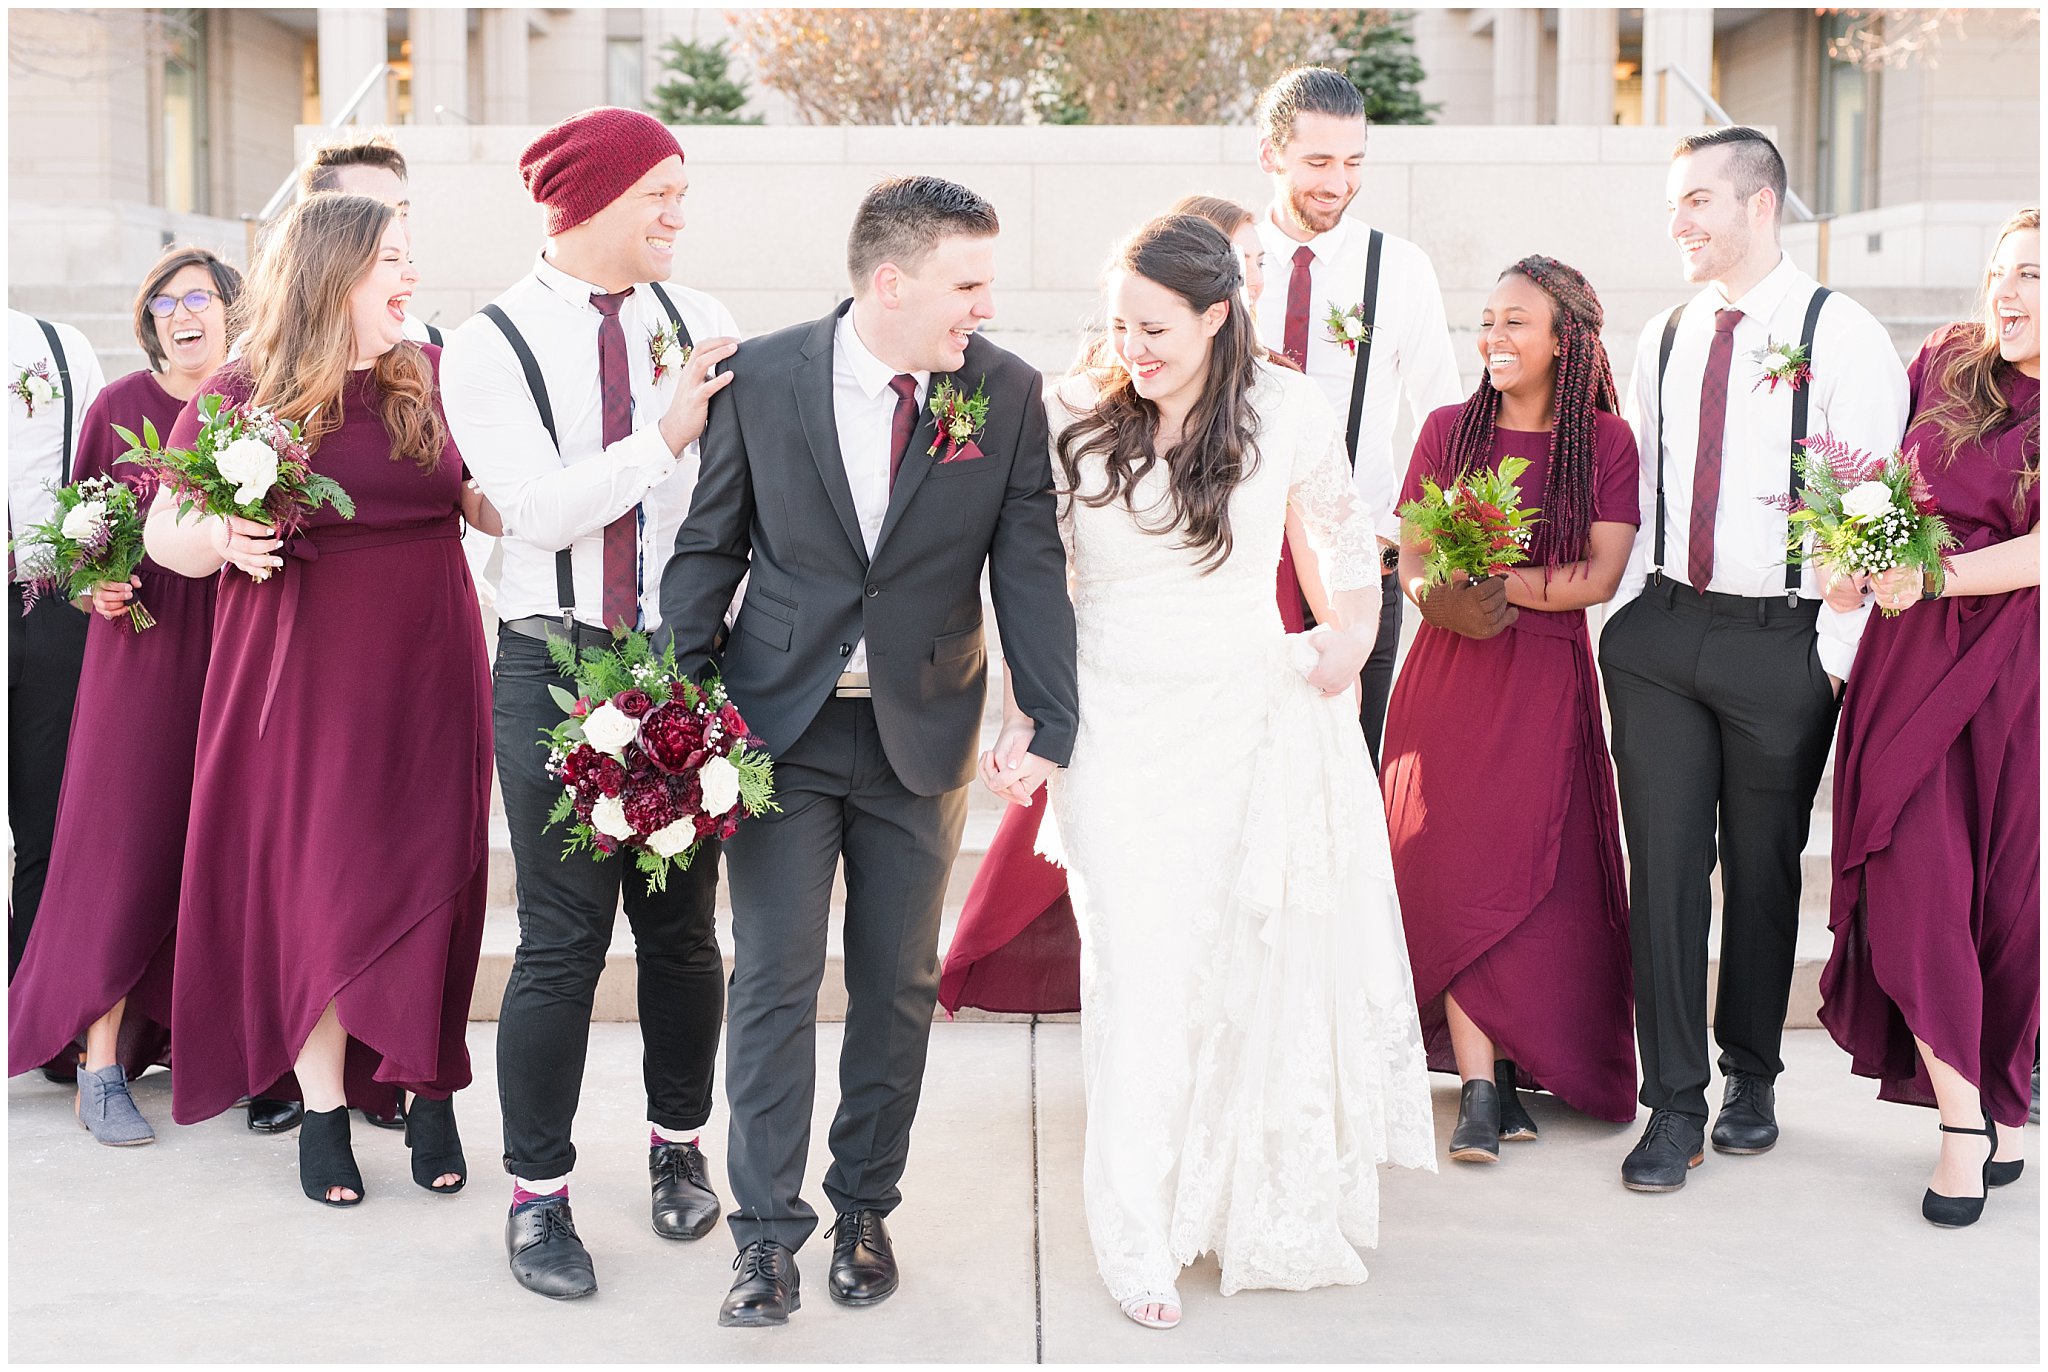 Bridal party portraits in burgundy and black at the Oquirrh Mountain Temple | Oquirrh Mountain Temple and Gardner Village Wedding | The Gathering Place | Jessie and Dallin Photography